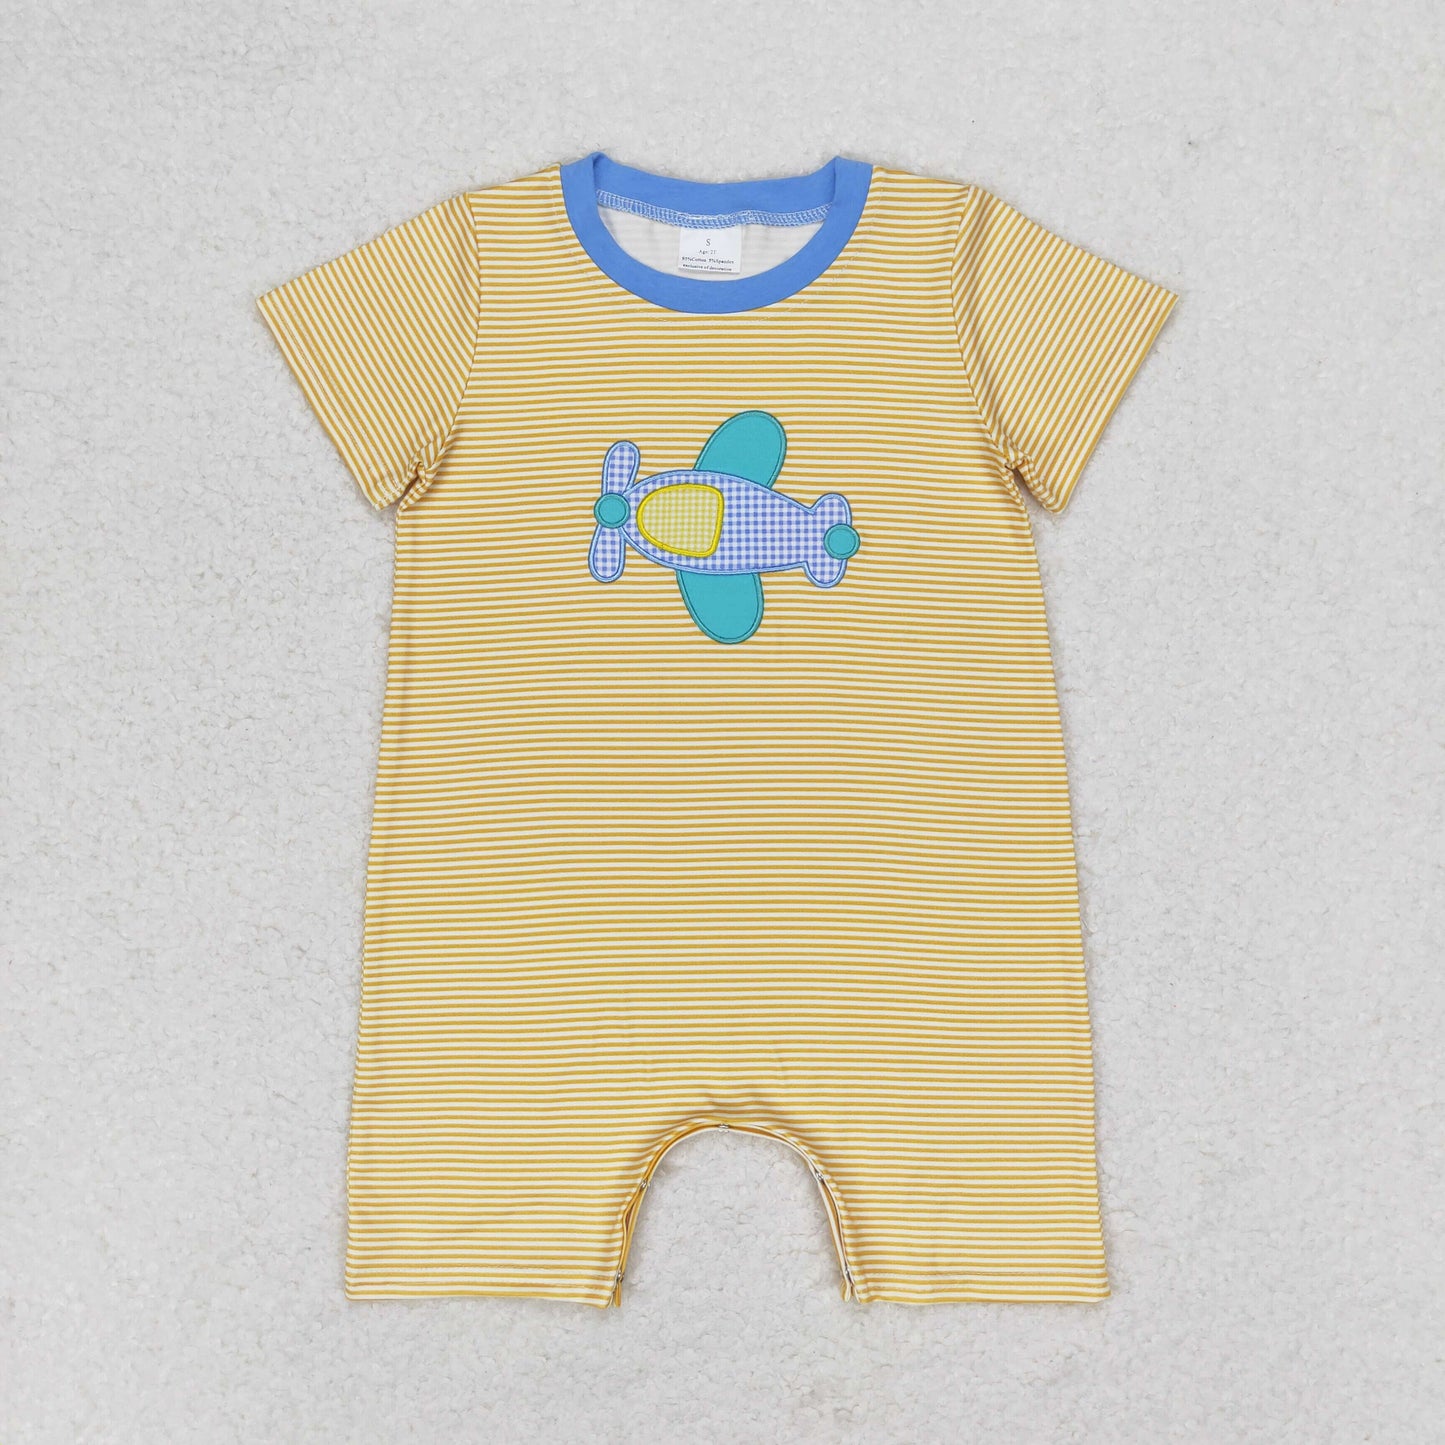 embroidery cartoon plane RTS sibling clothes